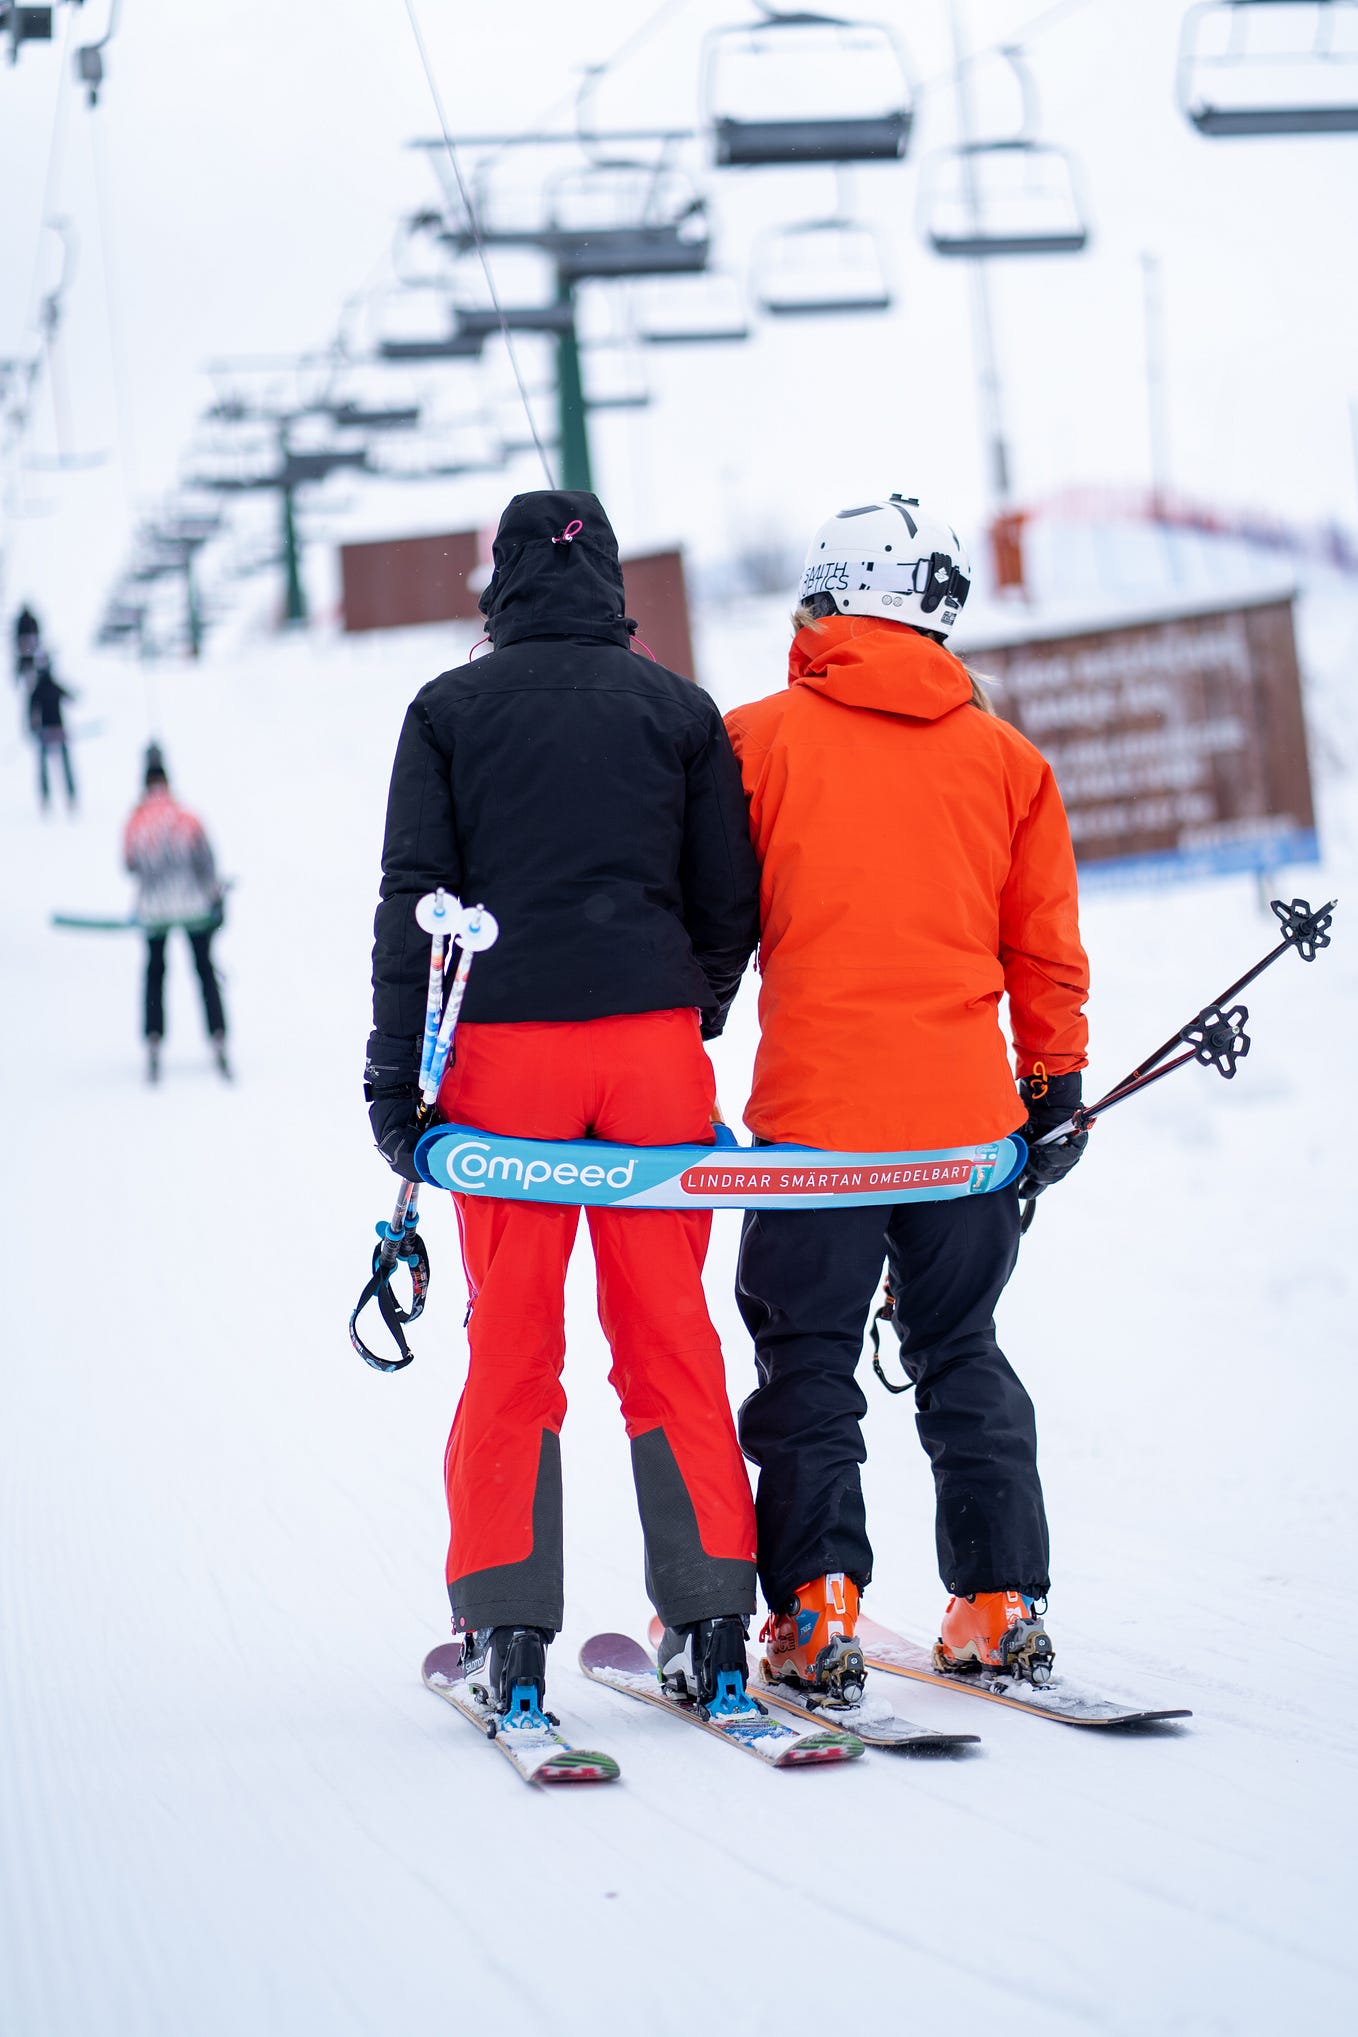 How to use T-bar ski lifts while snowboarding? | by Neha | Medium